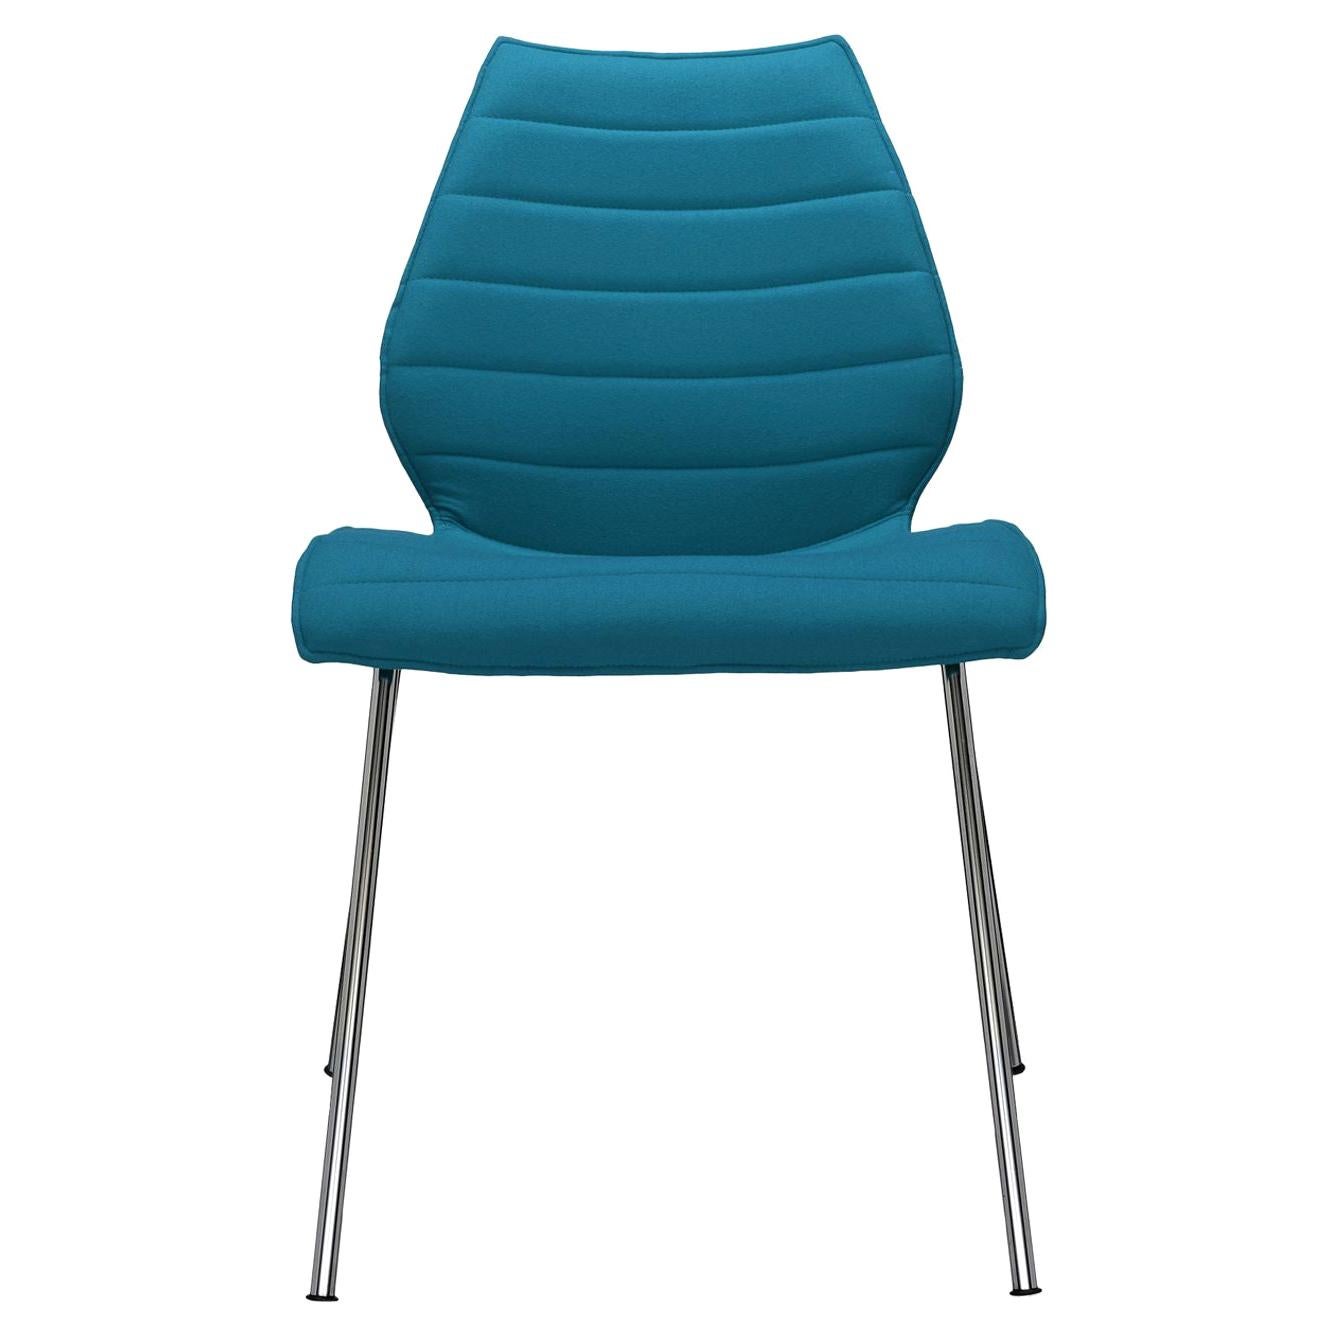 Set of 2 Kartell Maui Soft Trevira Chair in Teal by Vico Magistretti